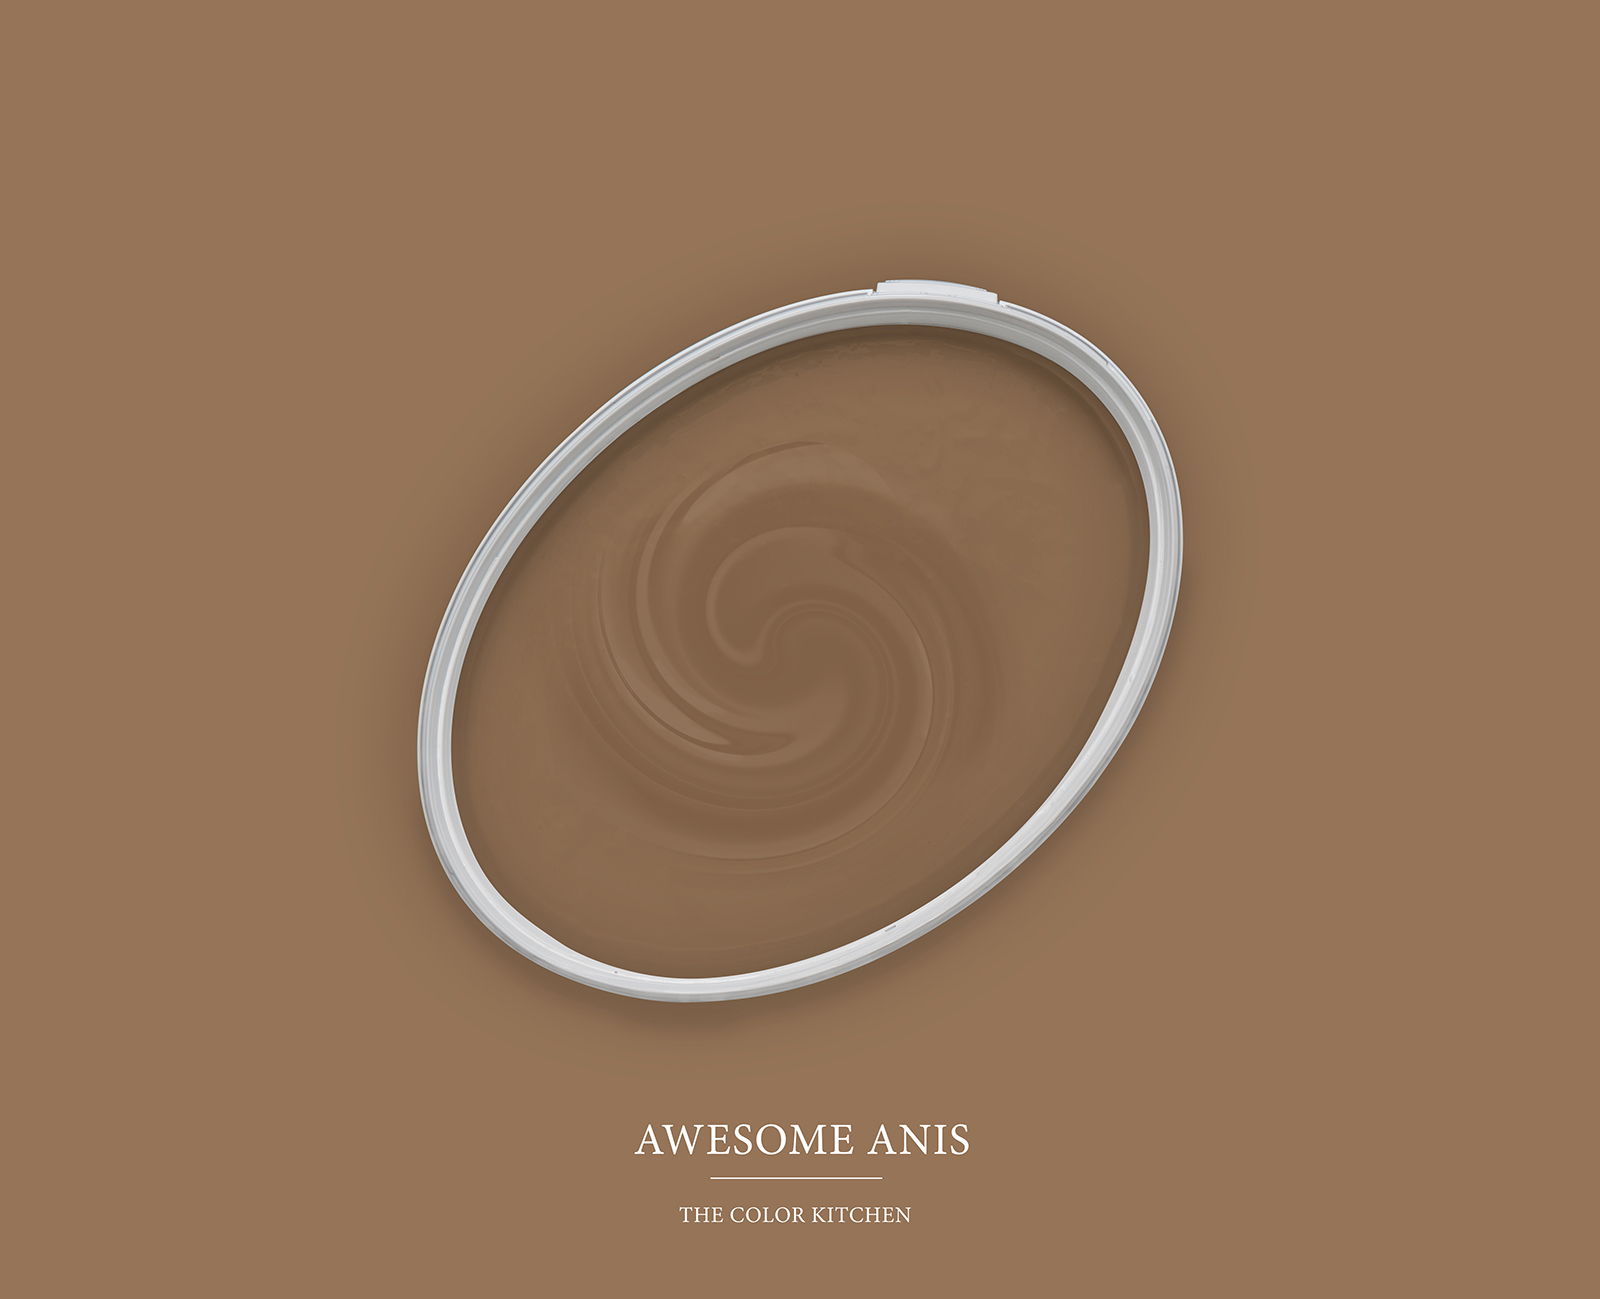 Wall Paint TCK6007 »Awesome Anis« in cosy brown – 5.0 litre
